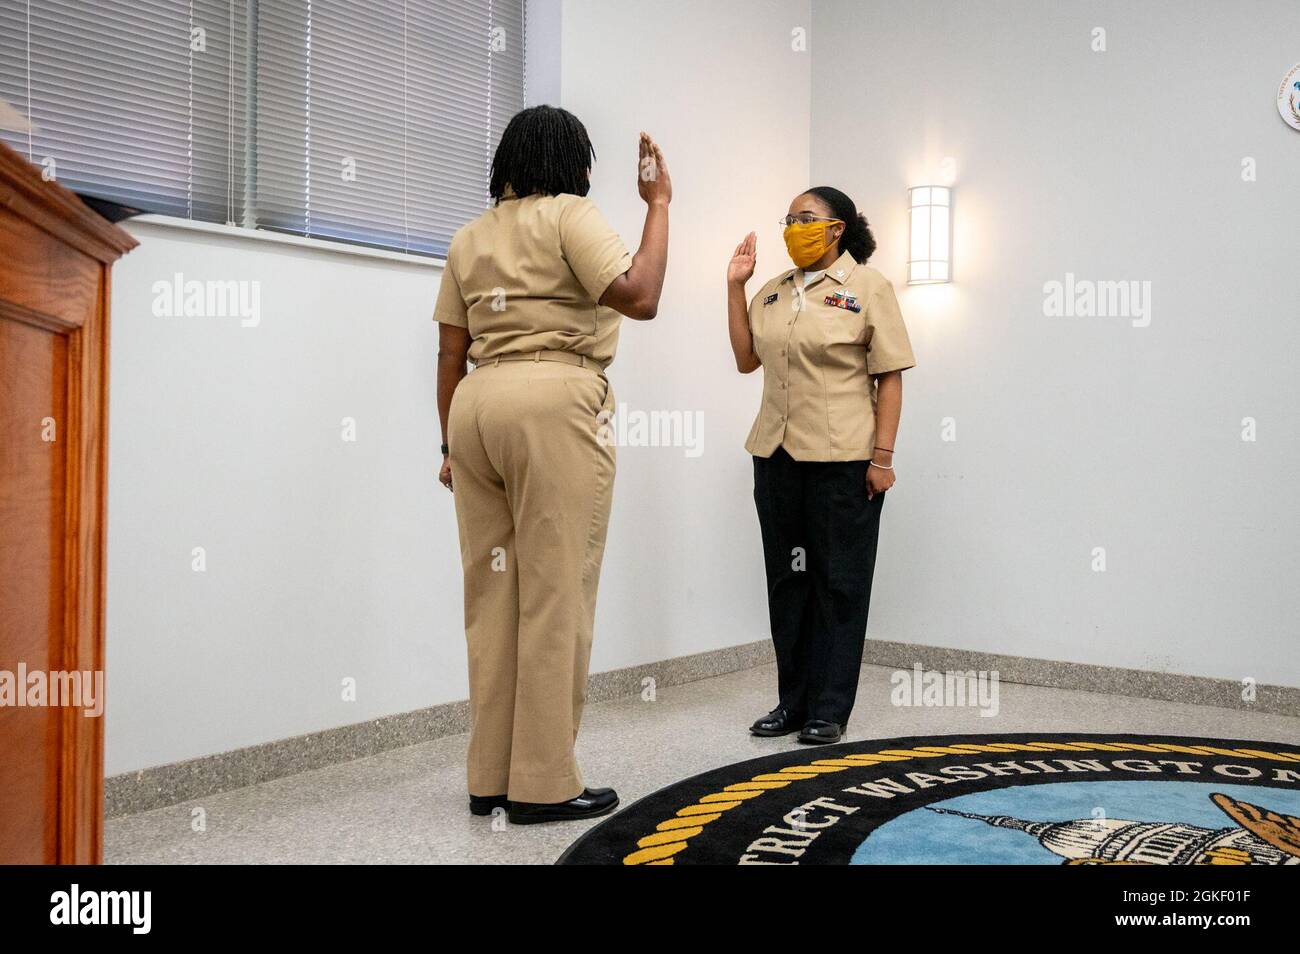 WASHINGTON, DC (April 2, 2021) – Culinary Specialist 2nd Class Sheniqua Lee recites the oath of enlistment during a ceremony onboard Washington Navy Yard. Stock Photo